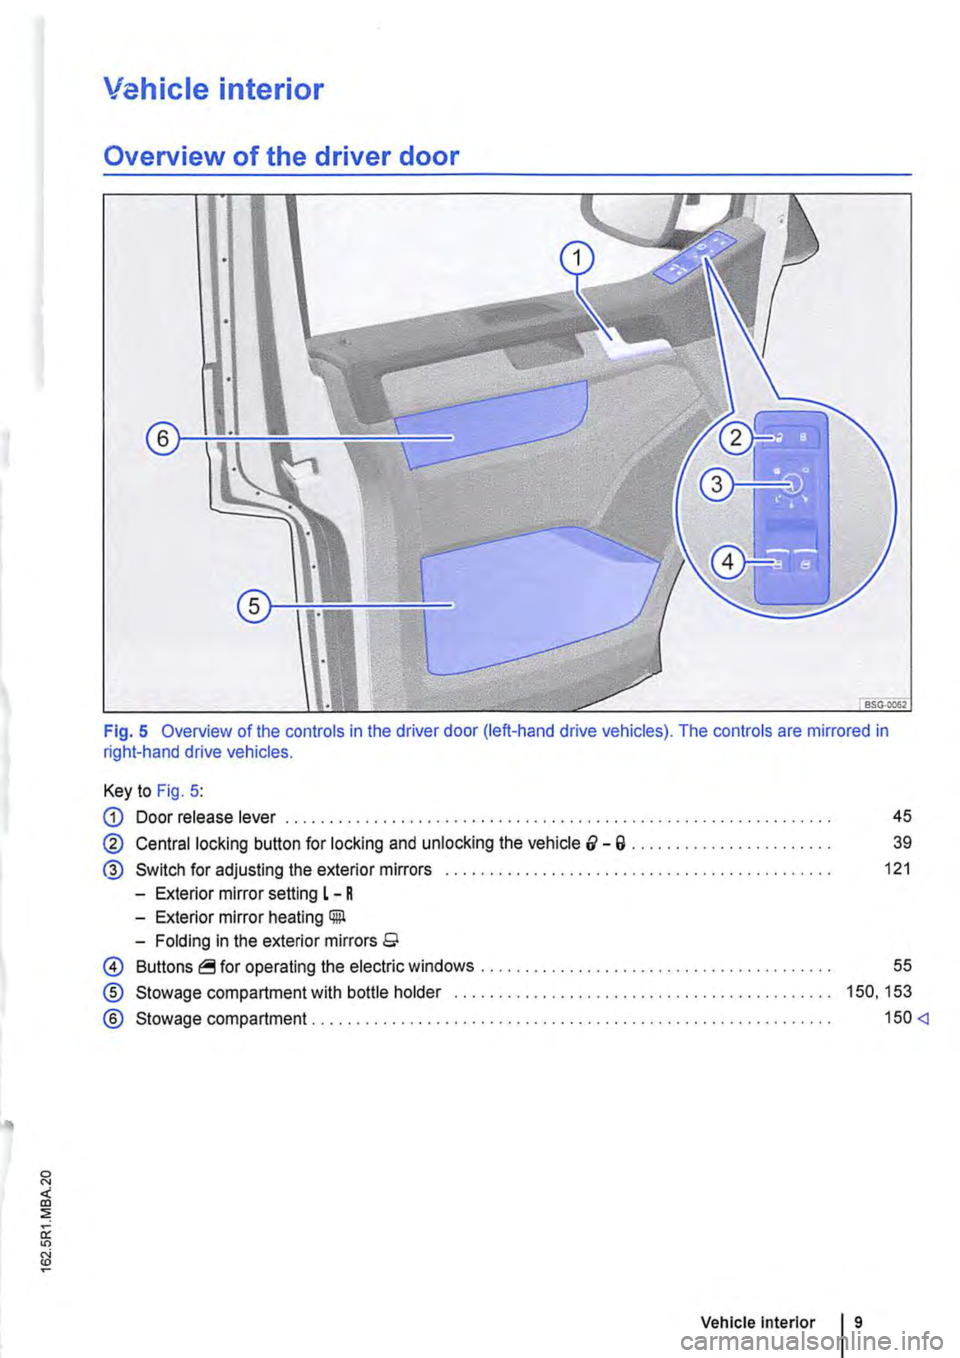 VOLKSWAGEN TRANSPORTER 2020  Owners Manual Vehicle interior 
Overview of the driver door 
Fig. 5 Overview of the controls in the driver door (left-hand drive vehicles). The controls are mirrored in right-hand drive vehicles. 
Key to Fig. 5: 
G